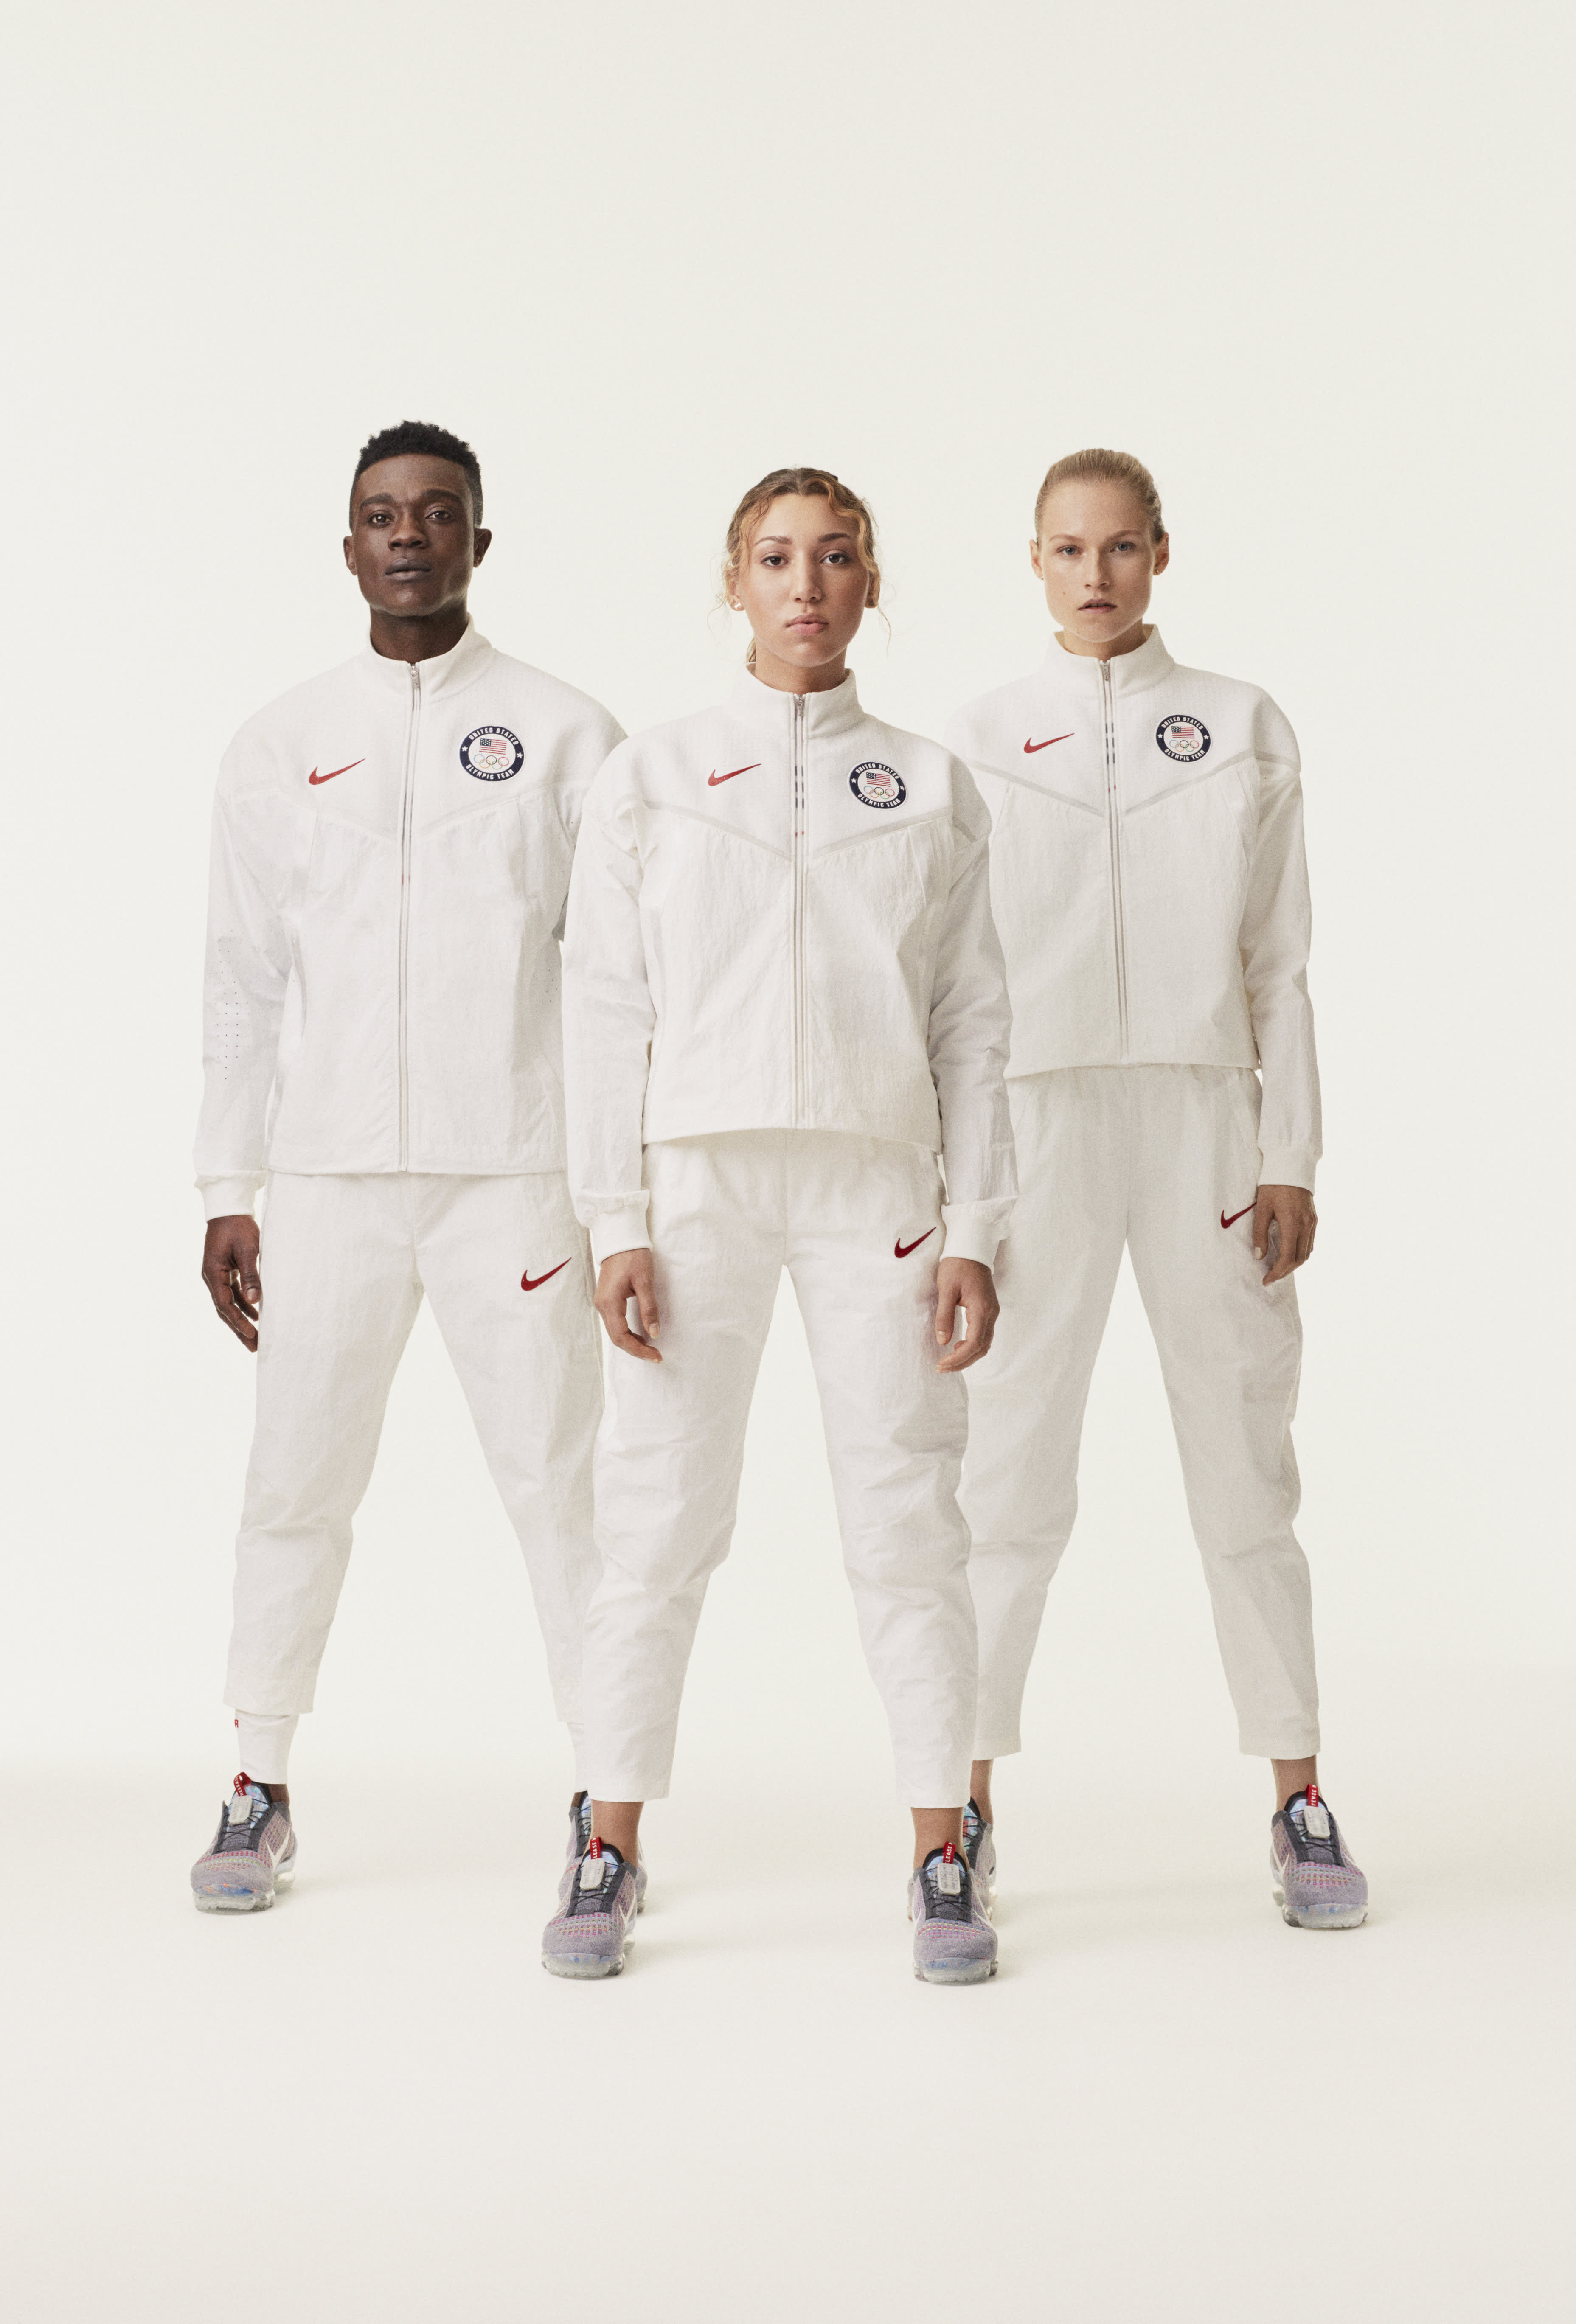 Nike is dressing 2020 Olympic athletes in uniforms made of recycled shoe parts